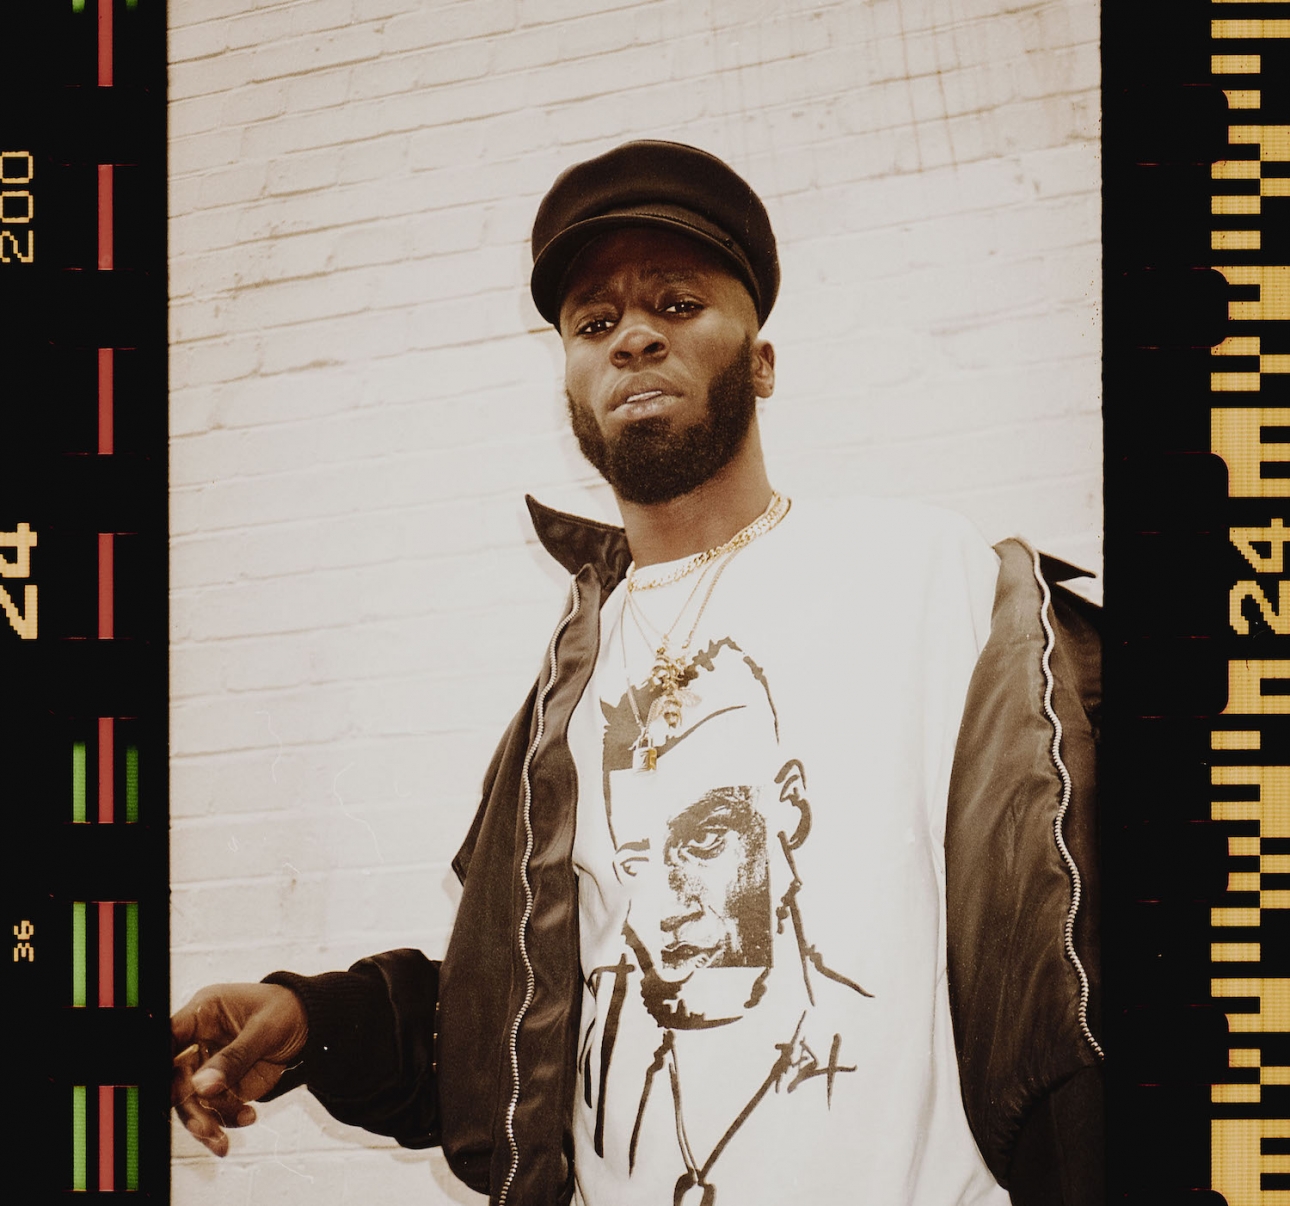 Kojey Radical links with KZ for new cut “25”